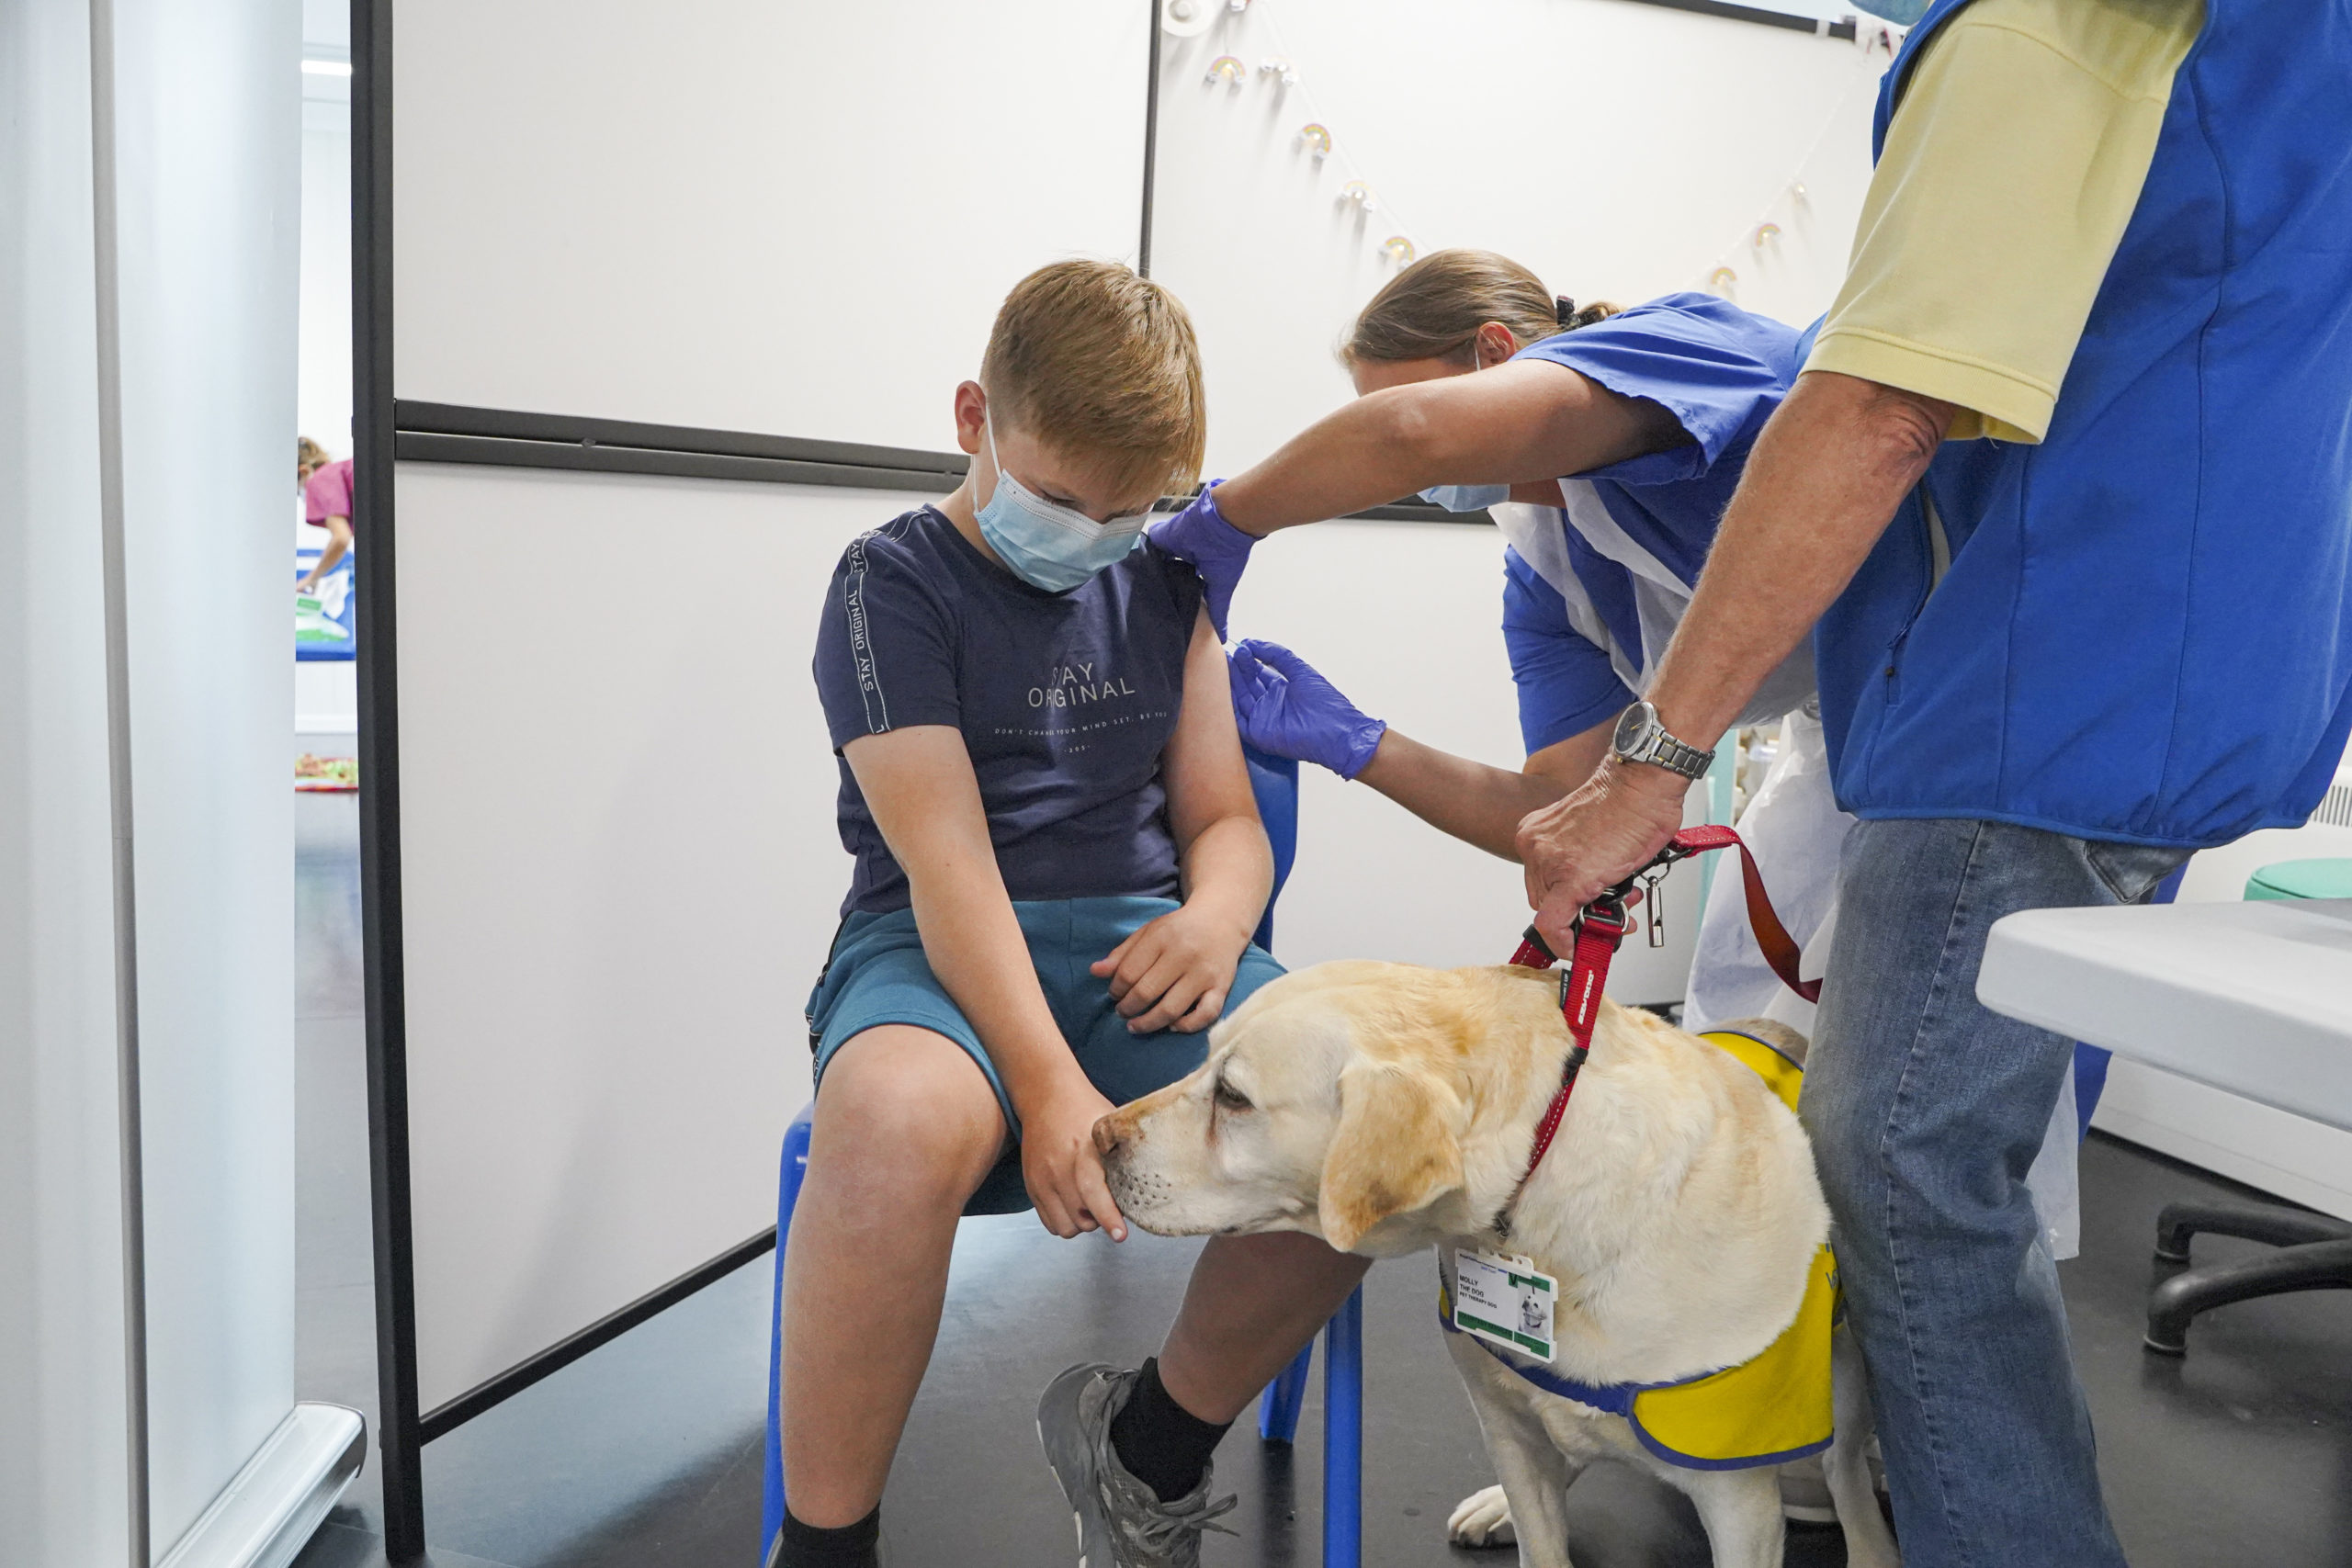 Molly, a seven-year-old labrador therapy dog is stroked by Jake Gregory of Cornwall while Jake receives his Covid vaccination at a temporary NHS Covid vaccination centre on August 20, 2022 in Wadebridge, England. On account of the constant attention they receive, therapy dogs work a maximum two-hour shift before they are rested for the day. Due to an increase in Covid cases, face masks have once again become compulsory in all NHS hospitals and treatment centres in Cornwall. (Photo by Hugh Hastings/Getty Images)